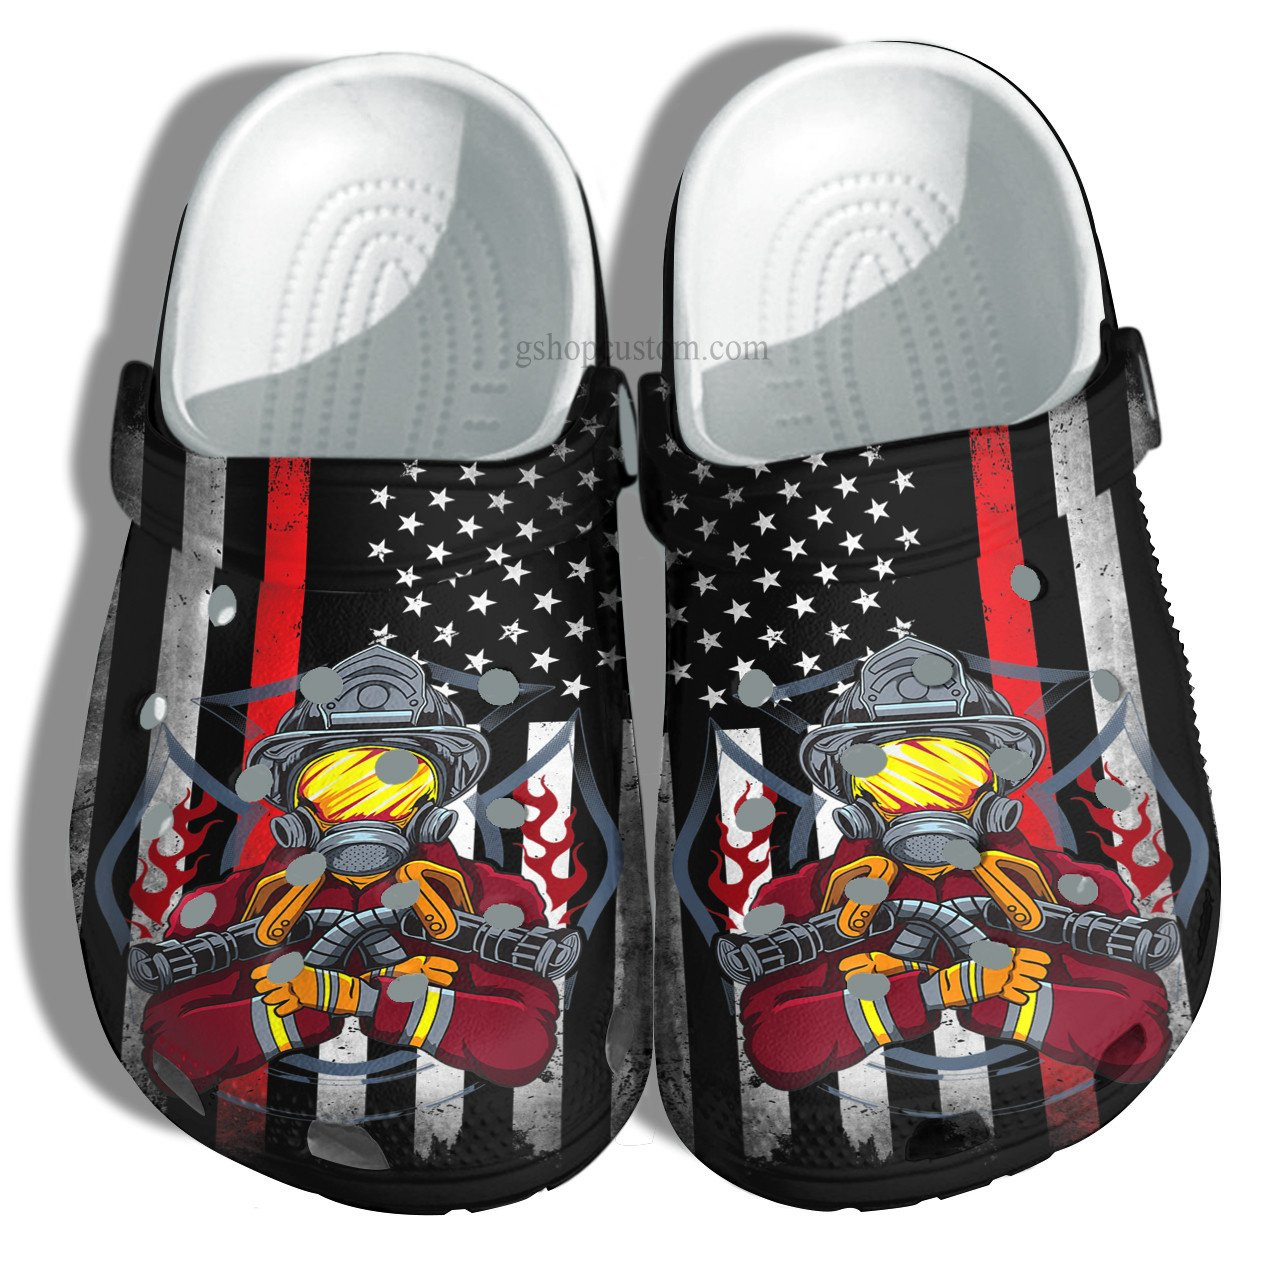 Firefighter Usa Flag Crocs Shoes – Firefighter Army Shoes Croc Clogs Gift Men Women Father Day